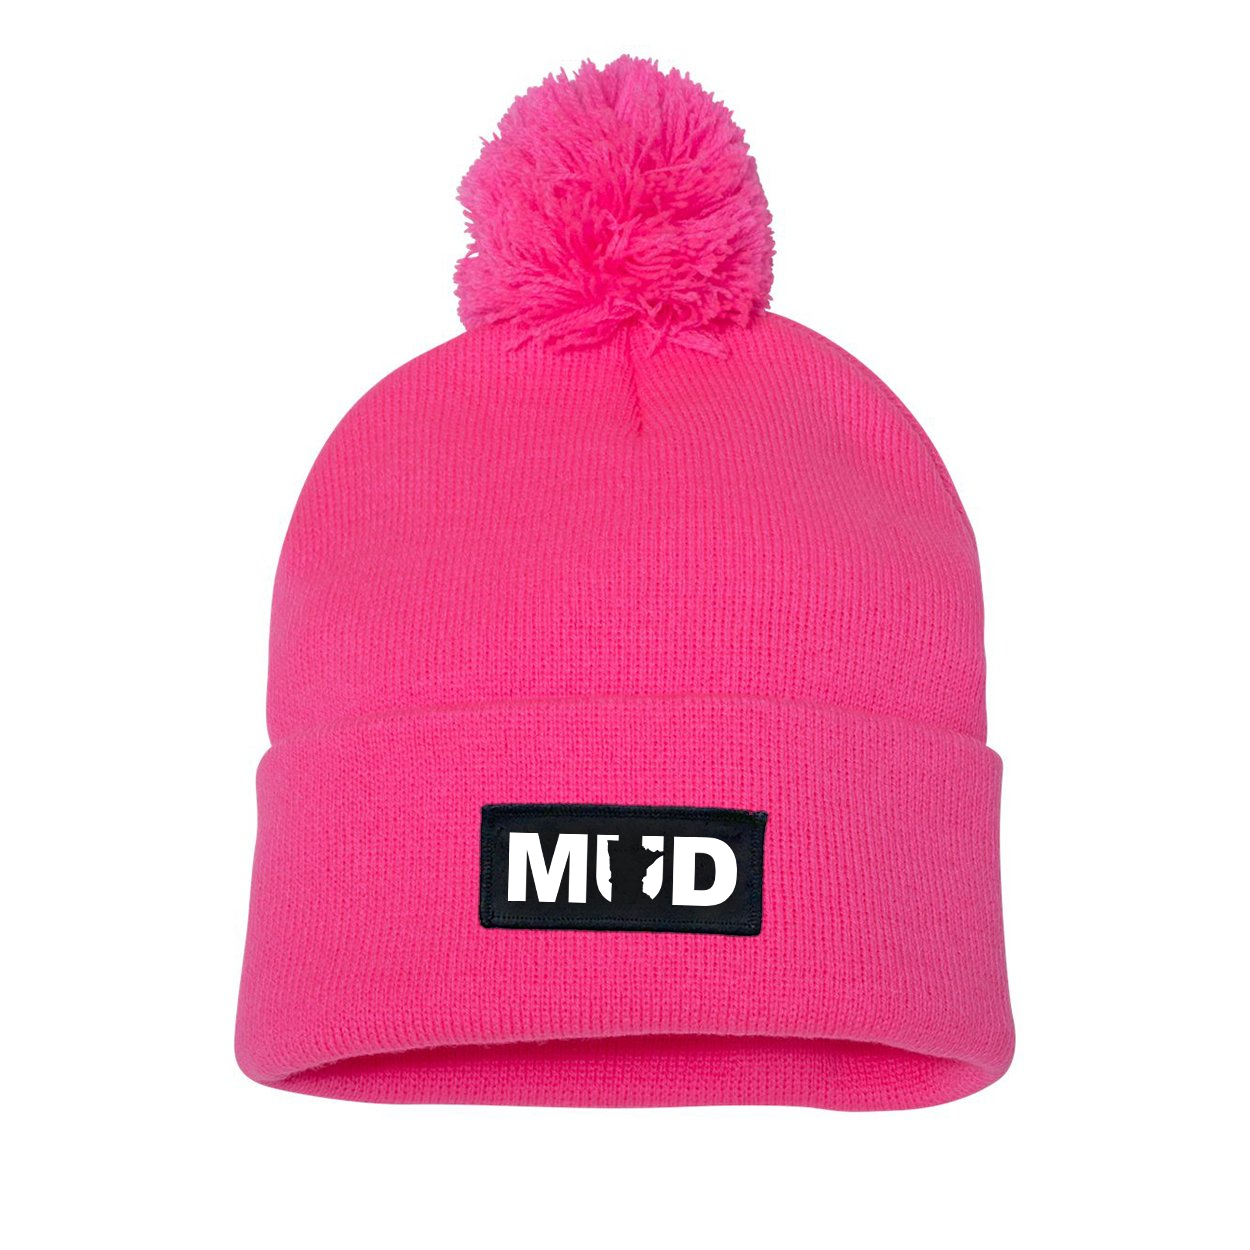 Mud Minnesota Night Out Woven Patch Roll Up Pom Knit Beanie Pink (White Logo)